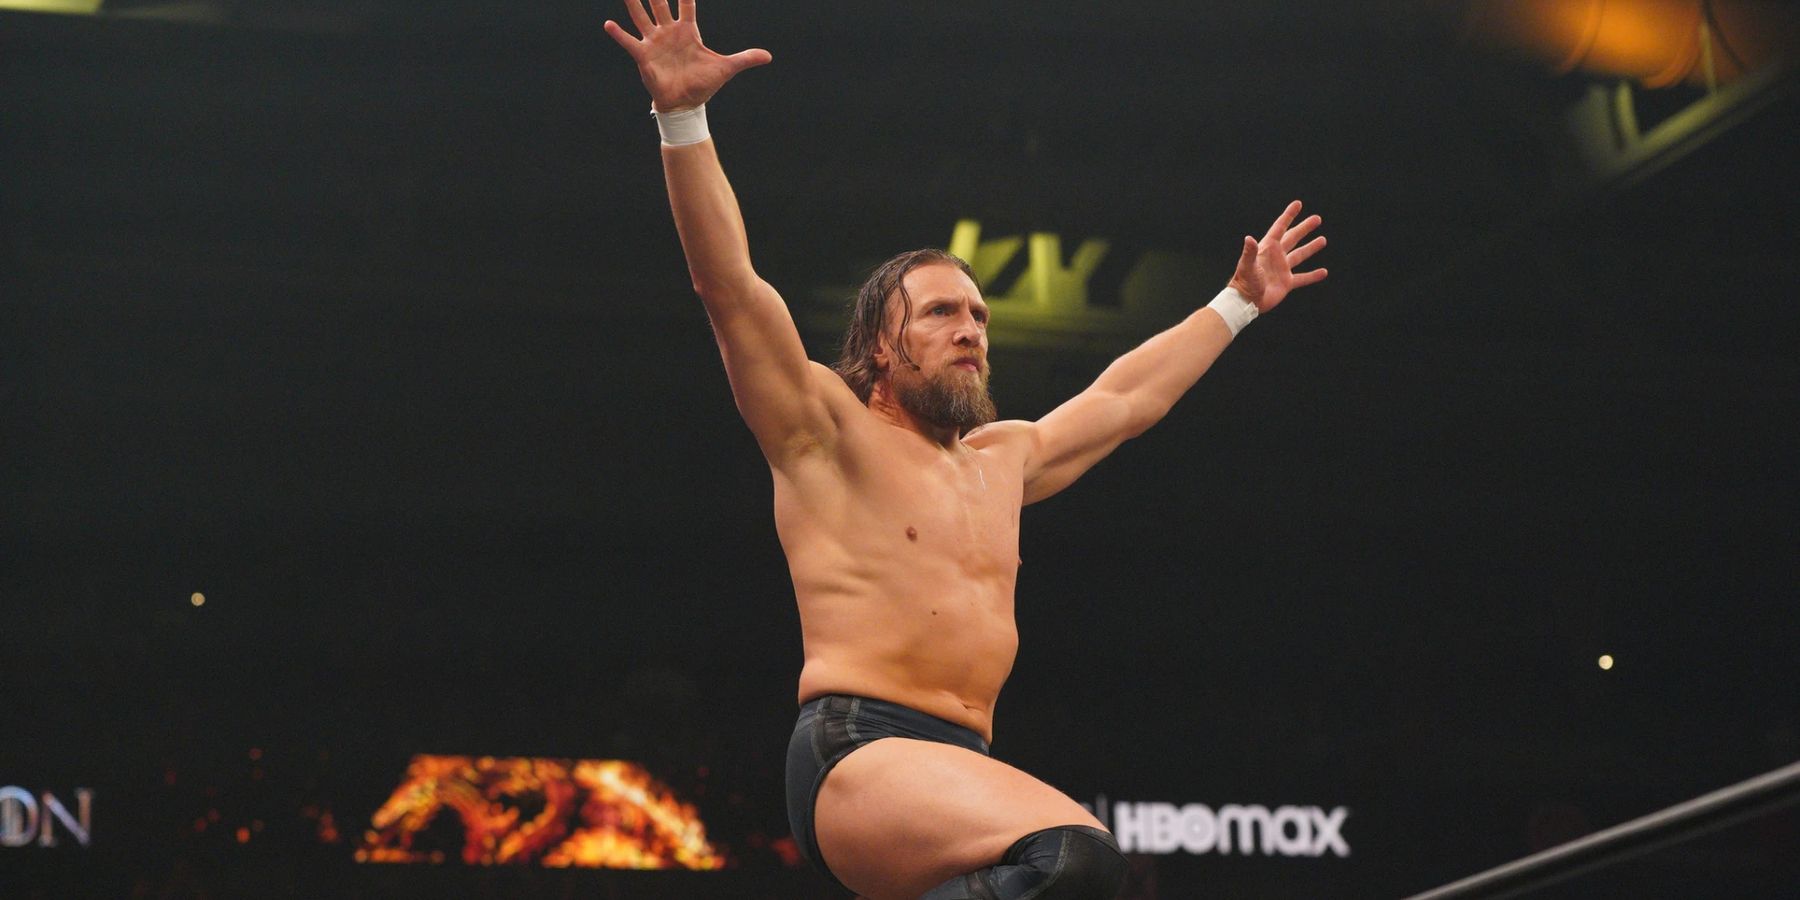 Bryan Danielson strikes his signature pose while playing to the crowd during an episode of AEW Dynamite in 2022.